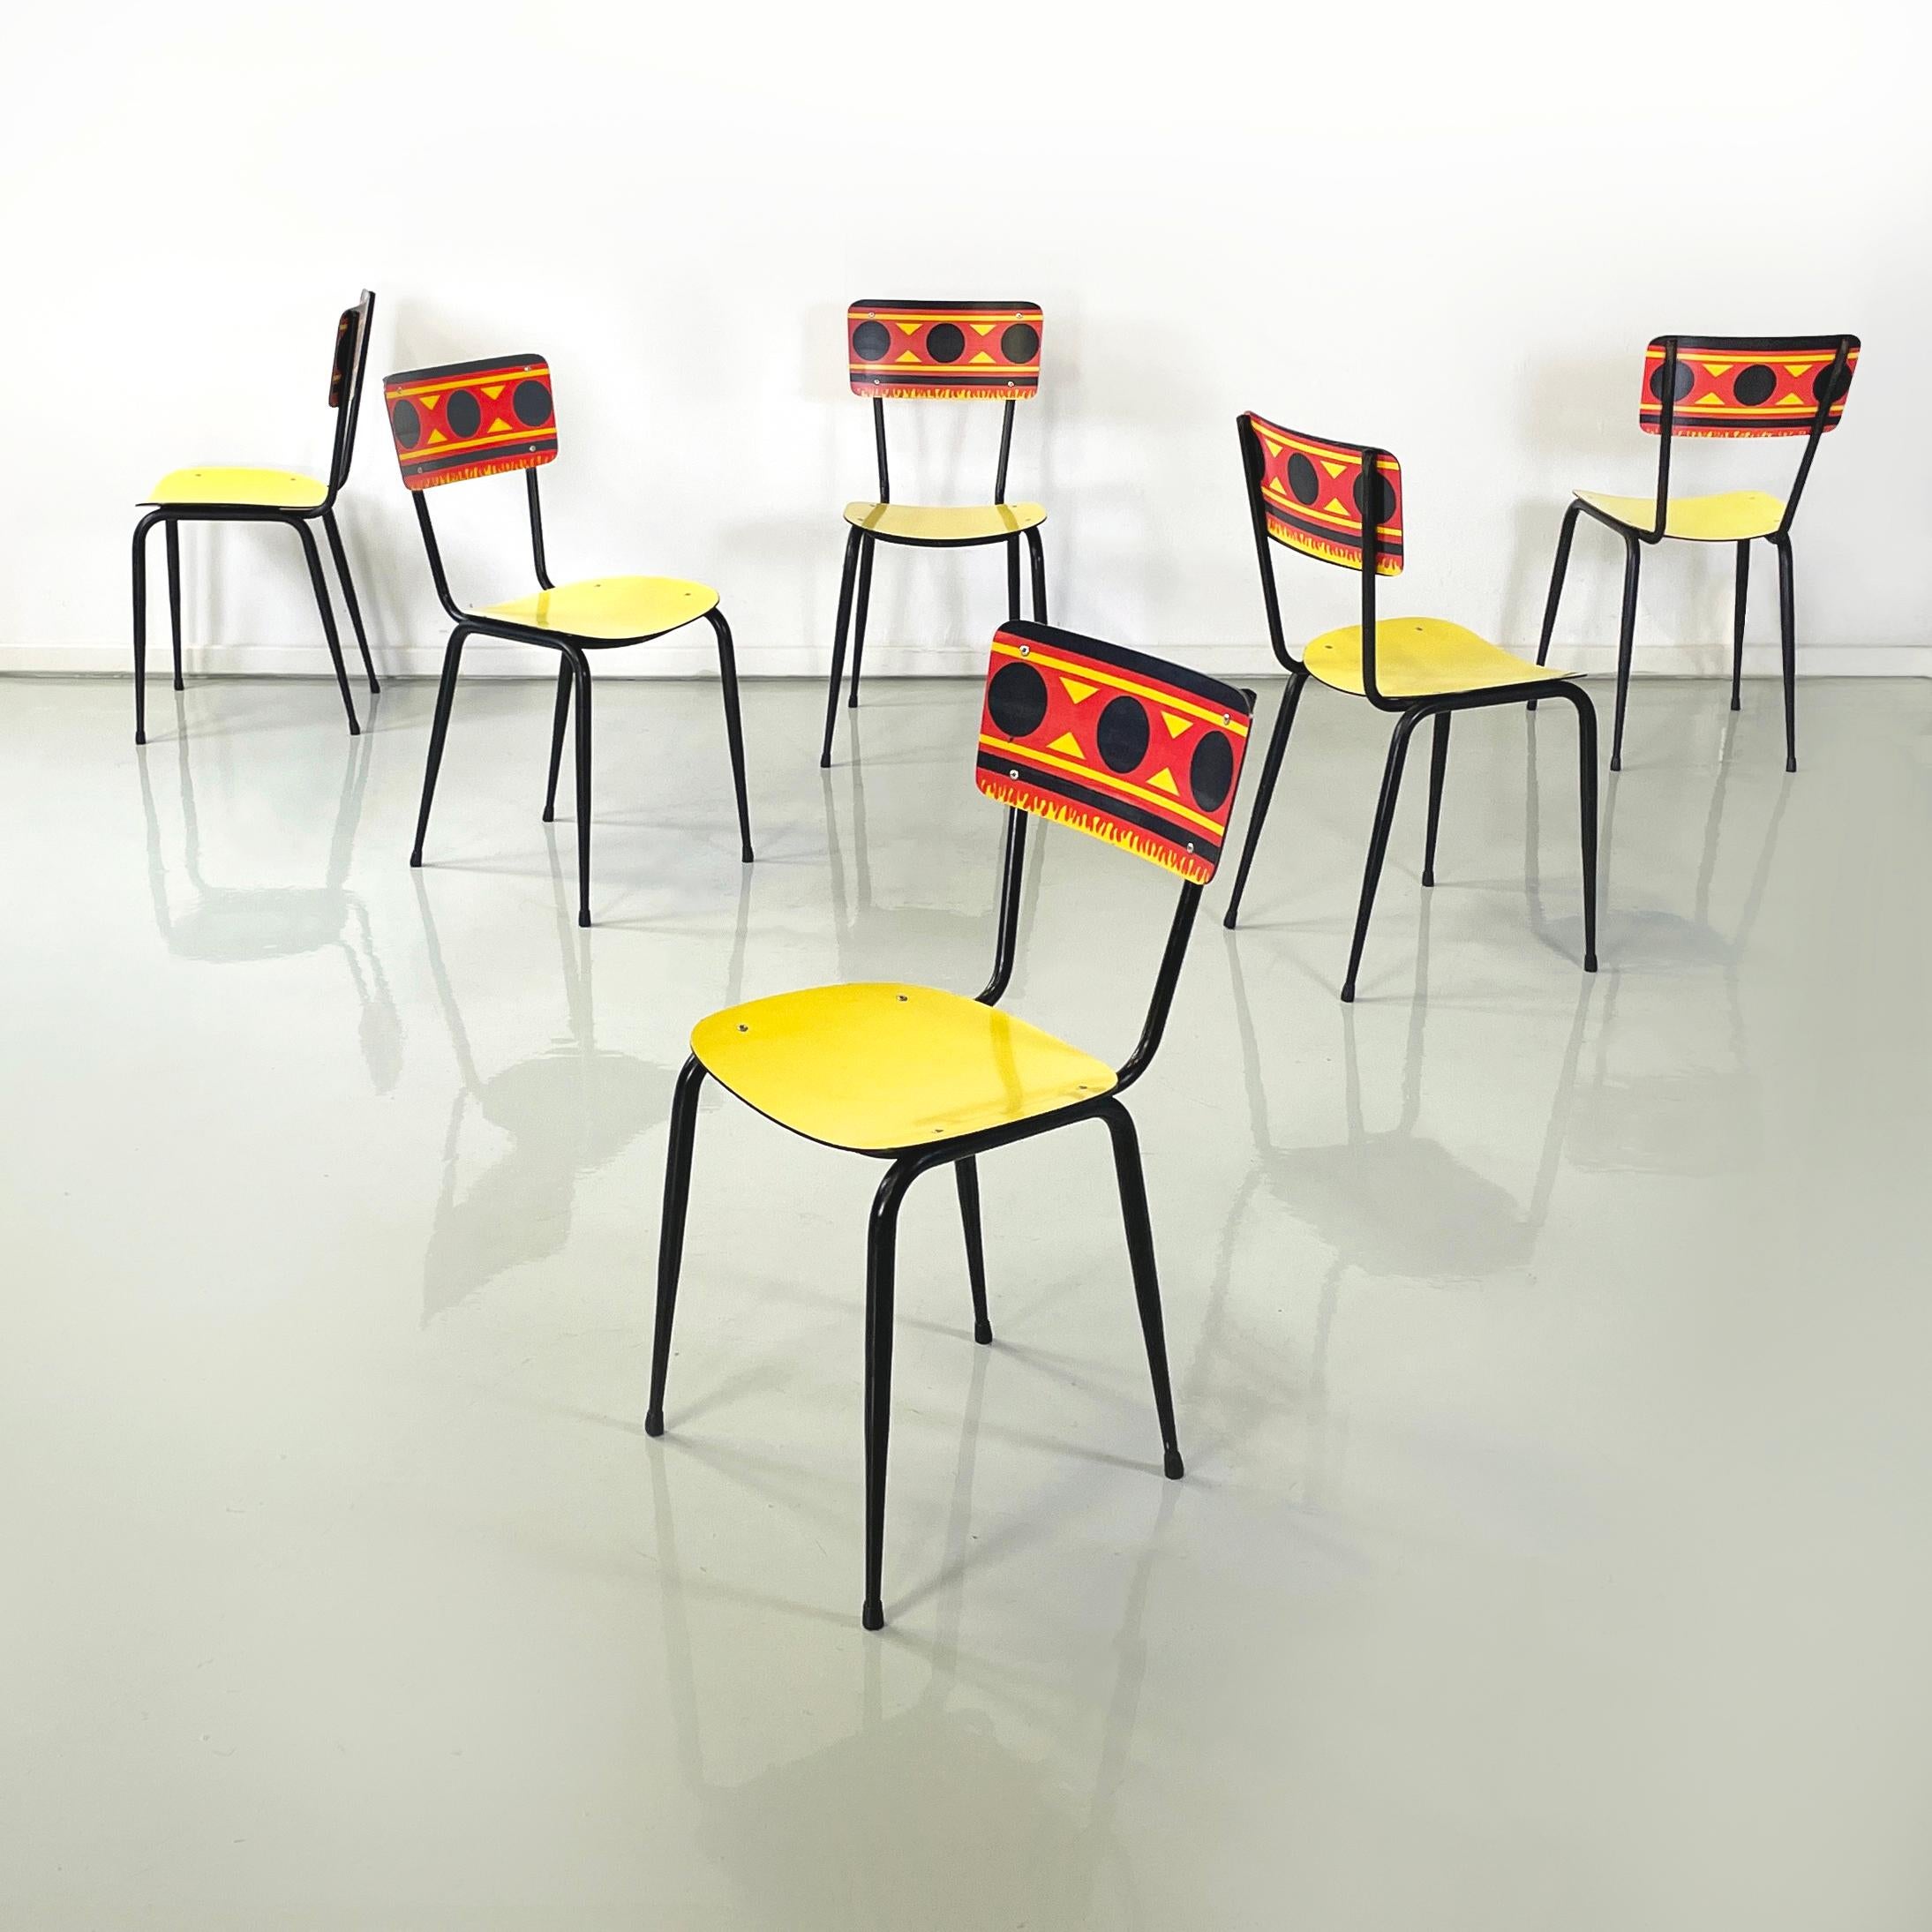 Italian mid-century modern Chairs Paulista in yellow, red, black formica and black tubular metal, 1960s
Set of 6 chairs belonging to the limited edition of the Gran Café Paulista by Lavazza. The square seat with rounded corners in bright yellow